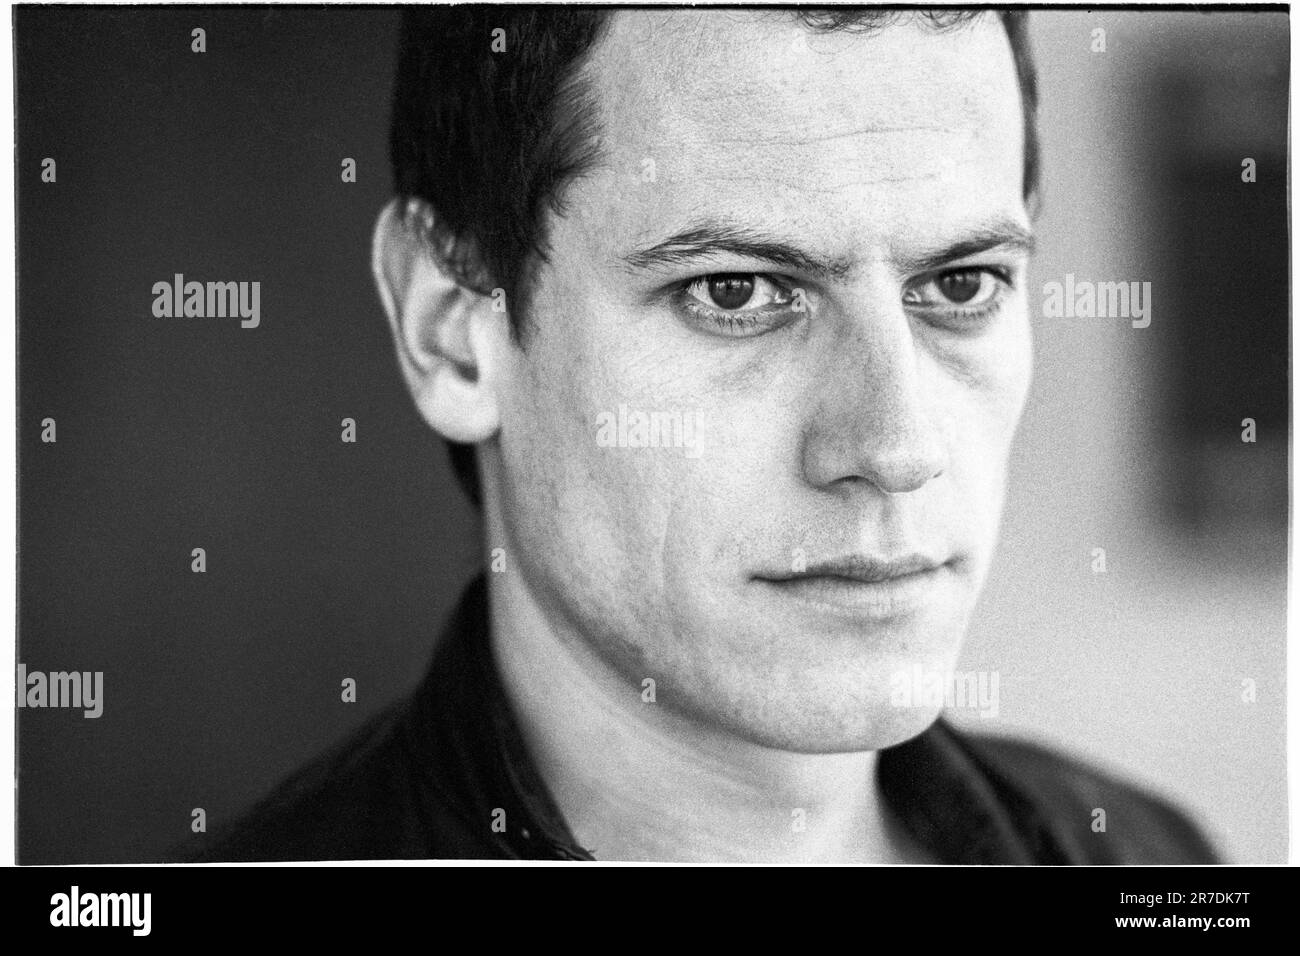 IOAN GRUFFUDD, ACTOR, 2001: Welsh actor Ioan Gruffudd at St David's Hotel in Cardiff in May 2001. He has a shaved head for his role in Black Hawk Down. Photo: Rob Watkins Stock Photo